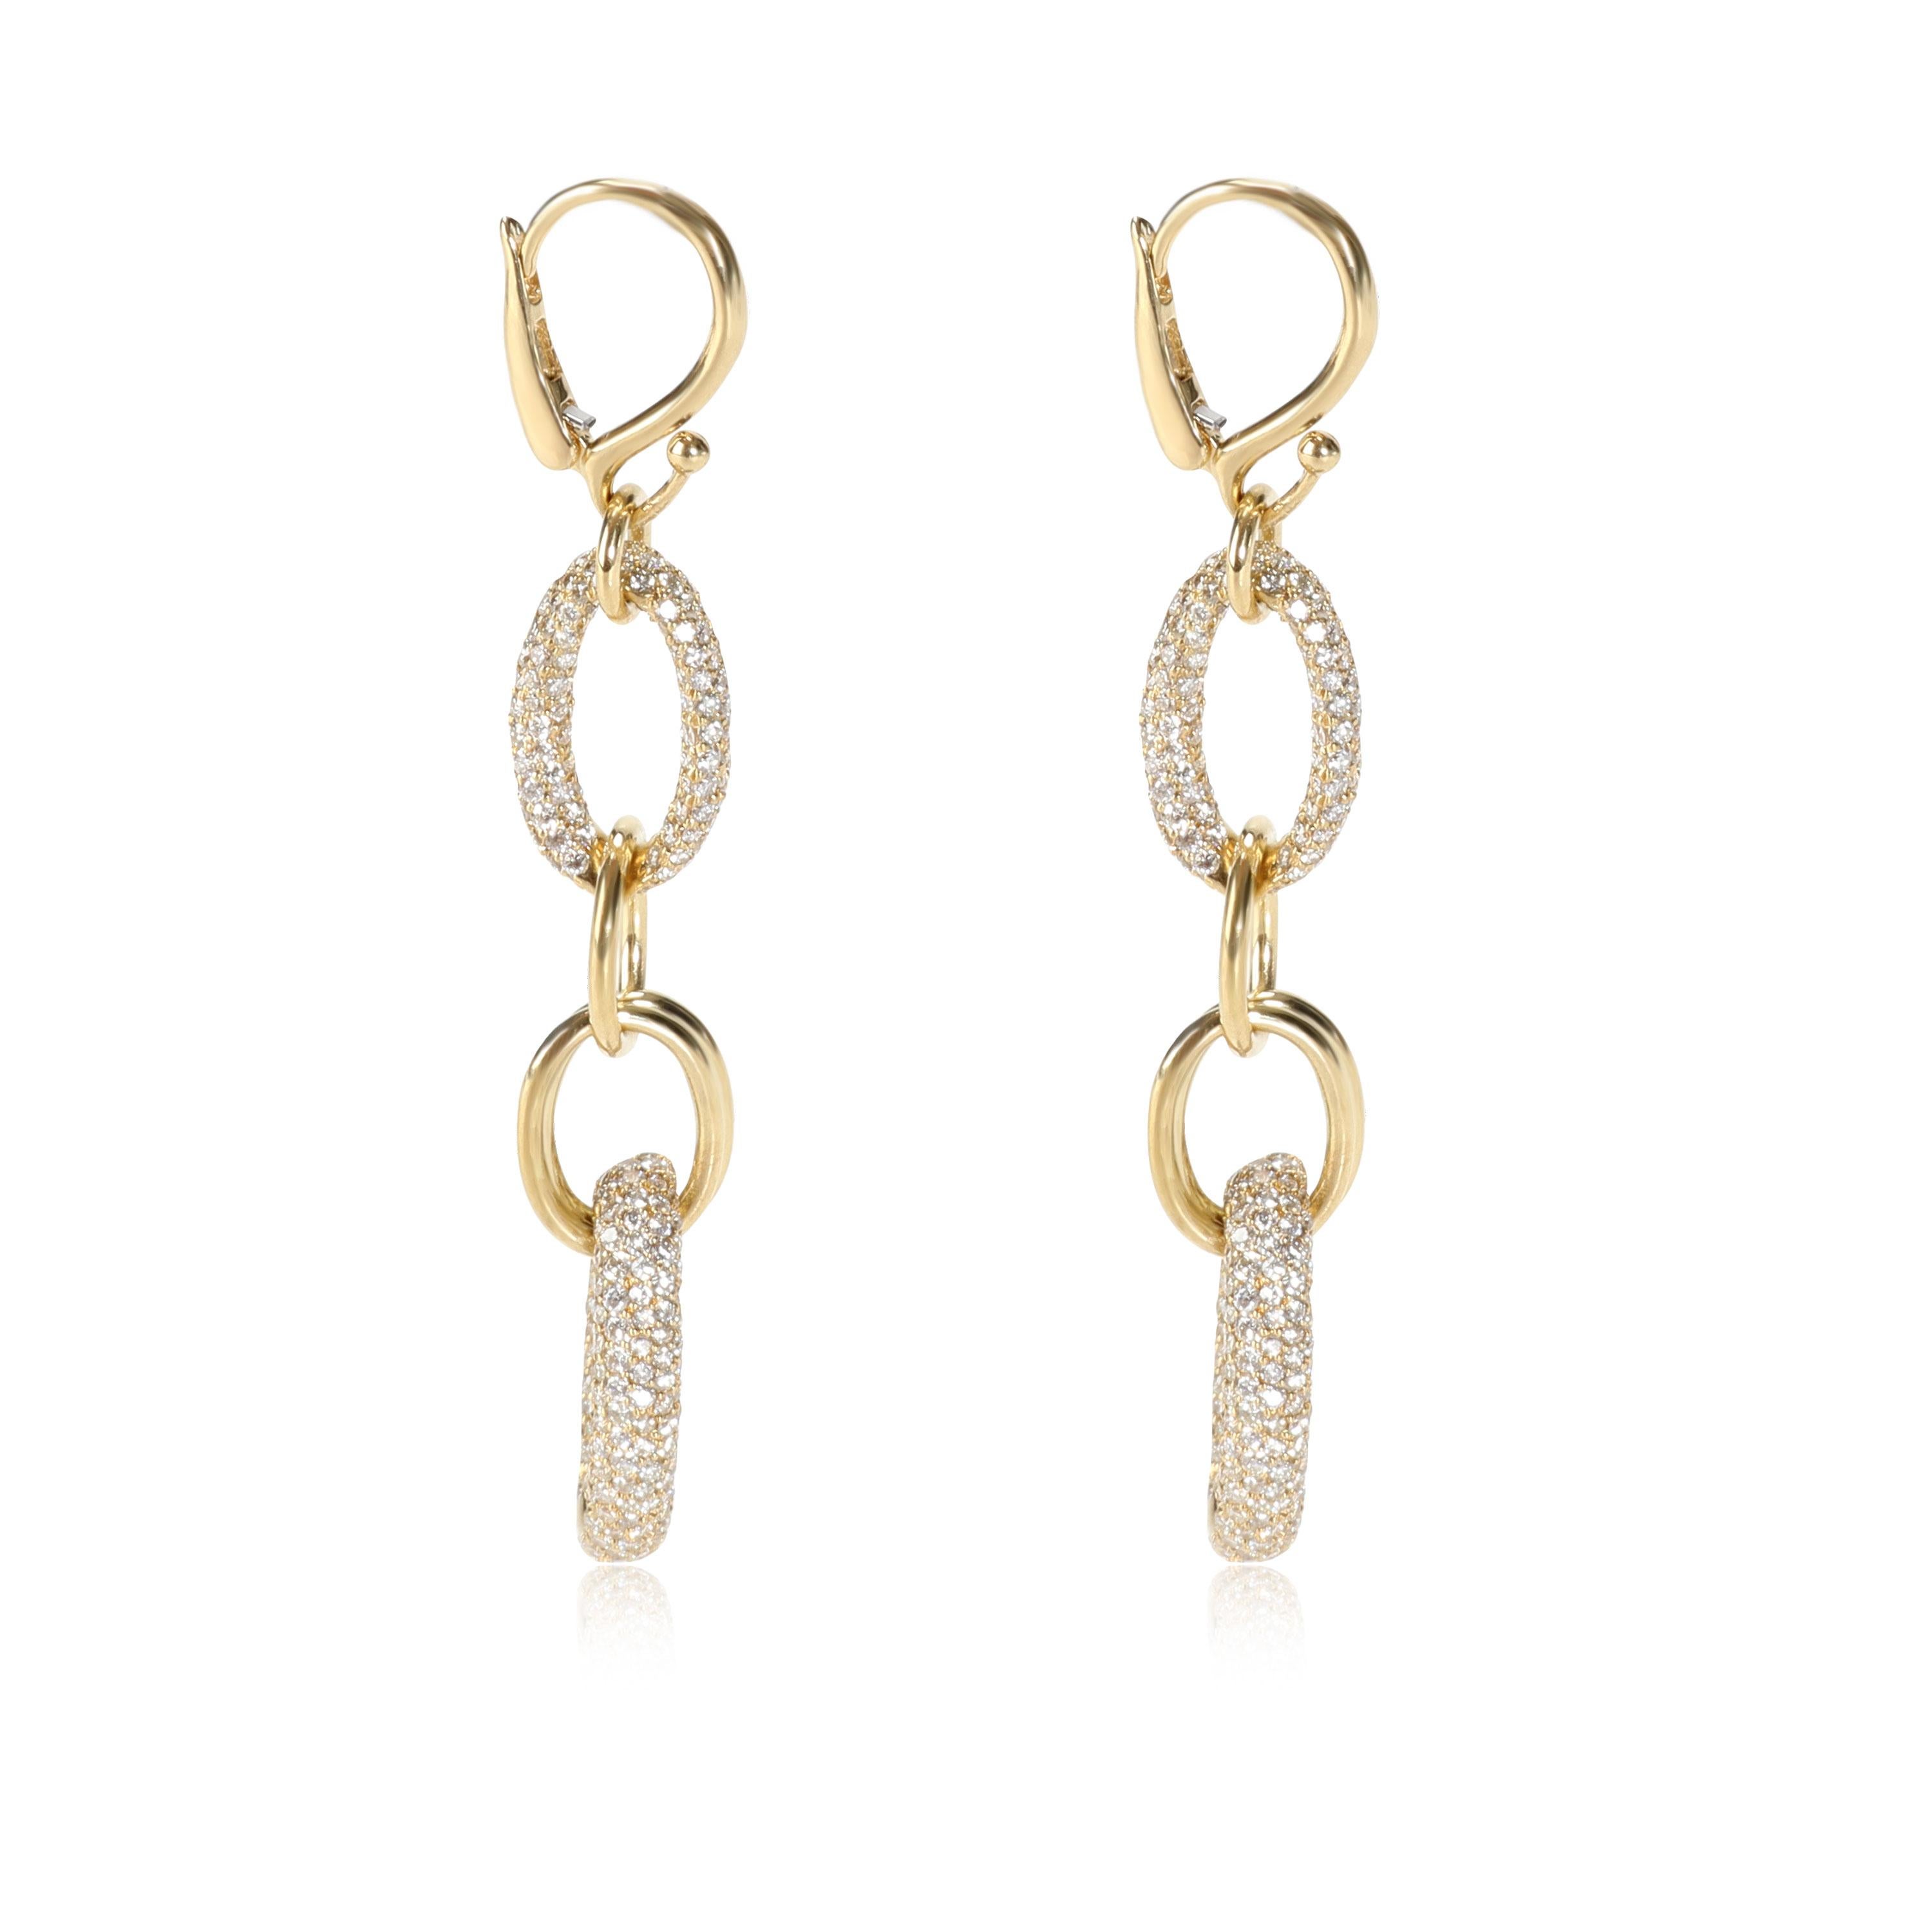 Ippolita Stardust Oval Link Drop Diamond Earring in 18K Yellow Gold 4.24 CTW

PRIMARY DETAILS
SKU: 112157
Listing Title: Ippolita Stardust Oval Link Drop Diamond Earring in 18K Yellow Gold 4.24 CTW
Condition Description: Retails for USD 15,500.